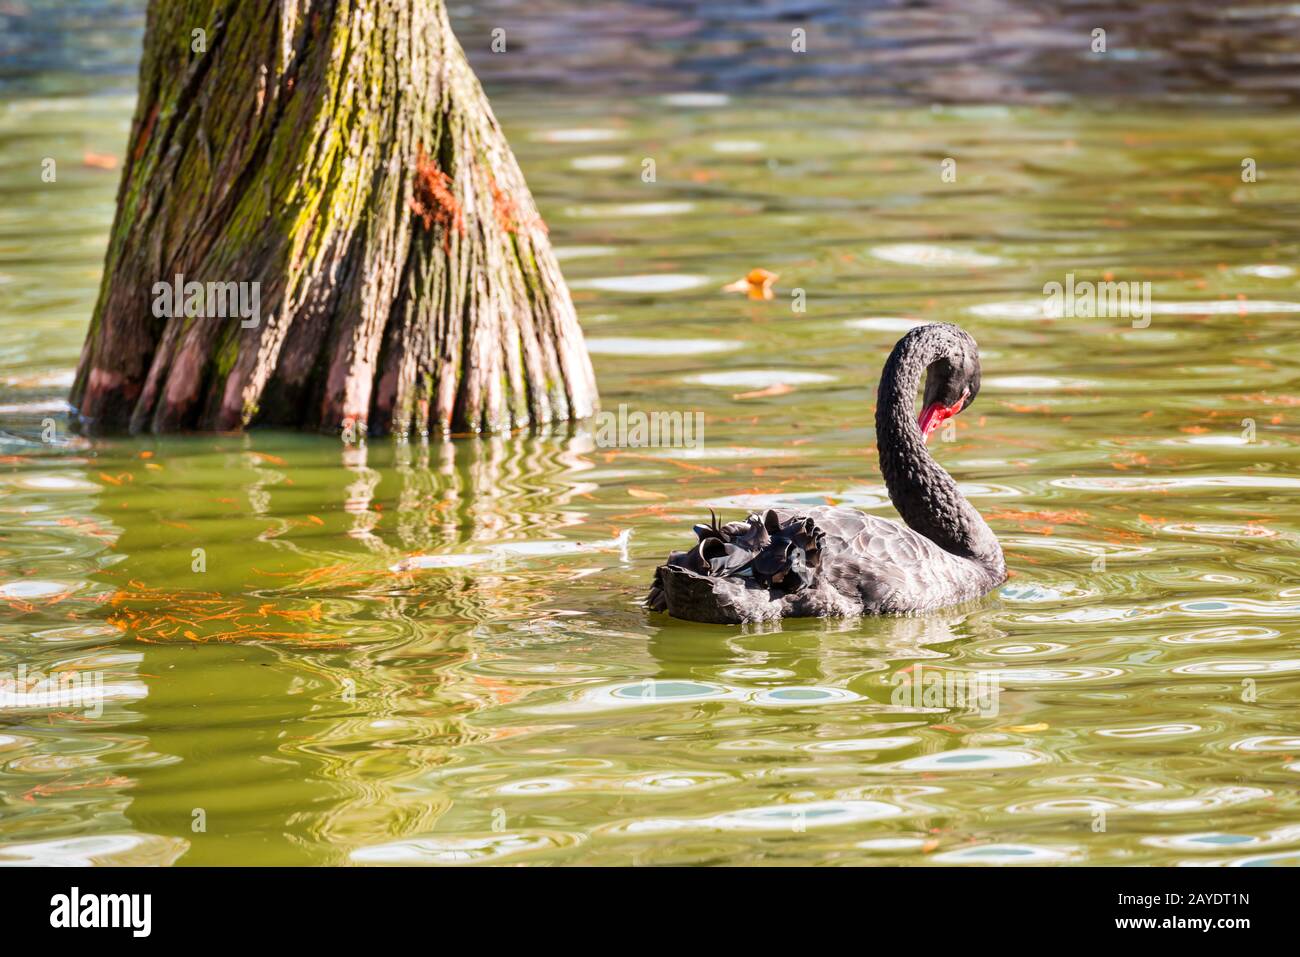 Black swan and ducks swimming in pond Stock Photo